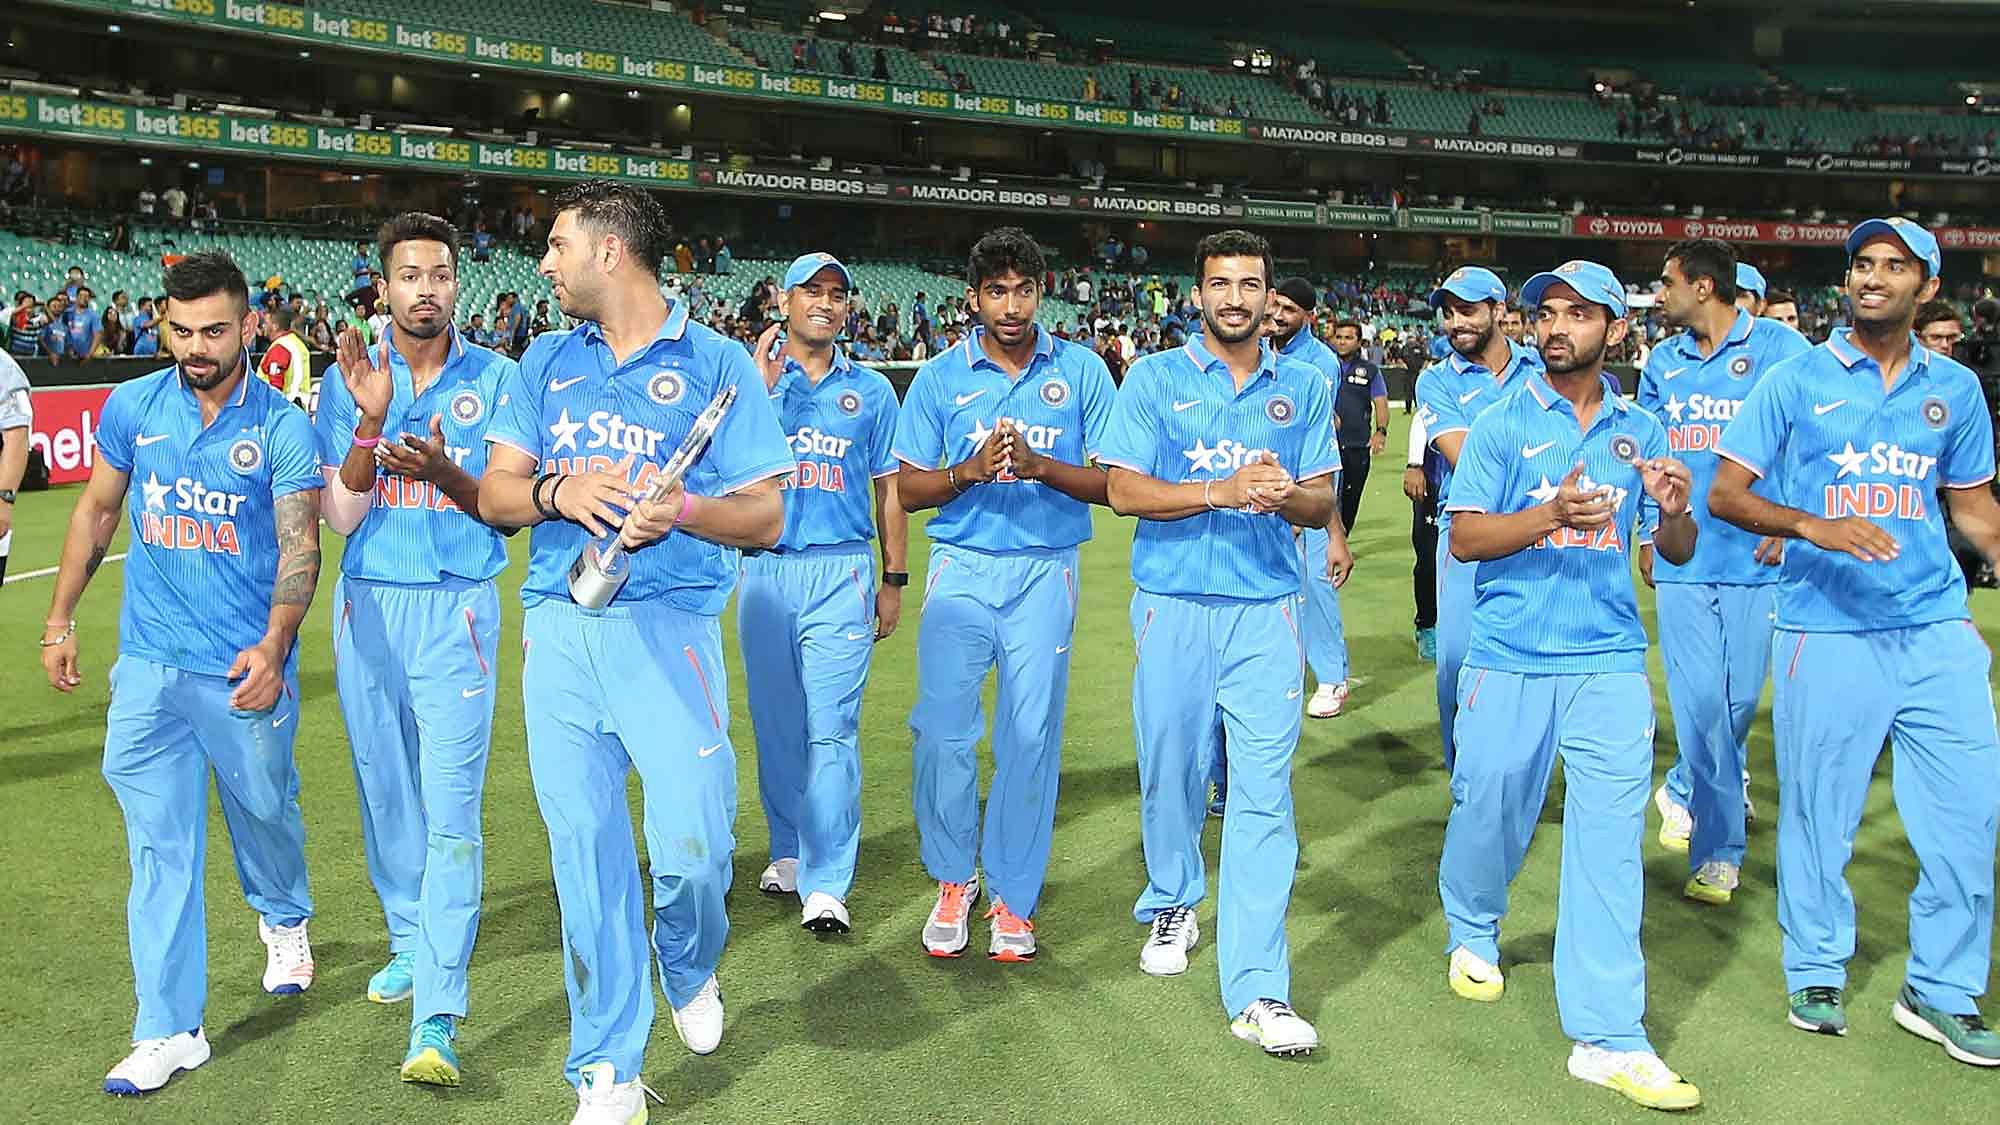 The Indian team take a victory lap after winning the Sydney T20. (Photo: AP)